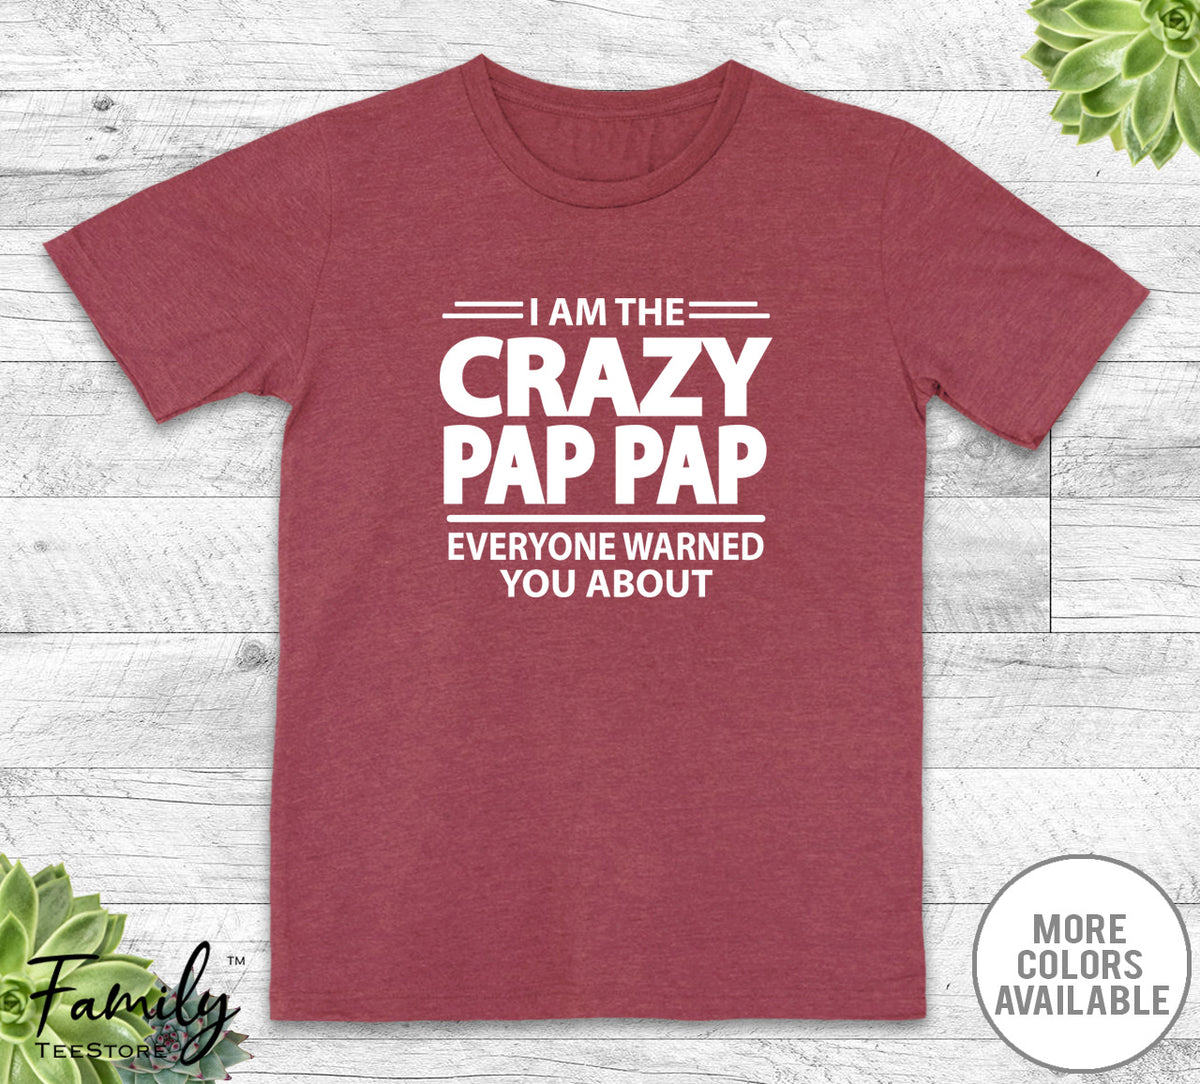 I Am The Crazy Pap Pap Everyone Warned You About - Unisex T-shirt - Pap Pap Shirt - Pap Pap Gift - familyteeprints